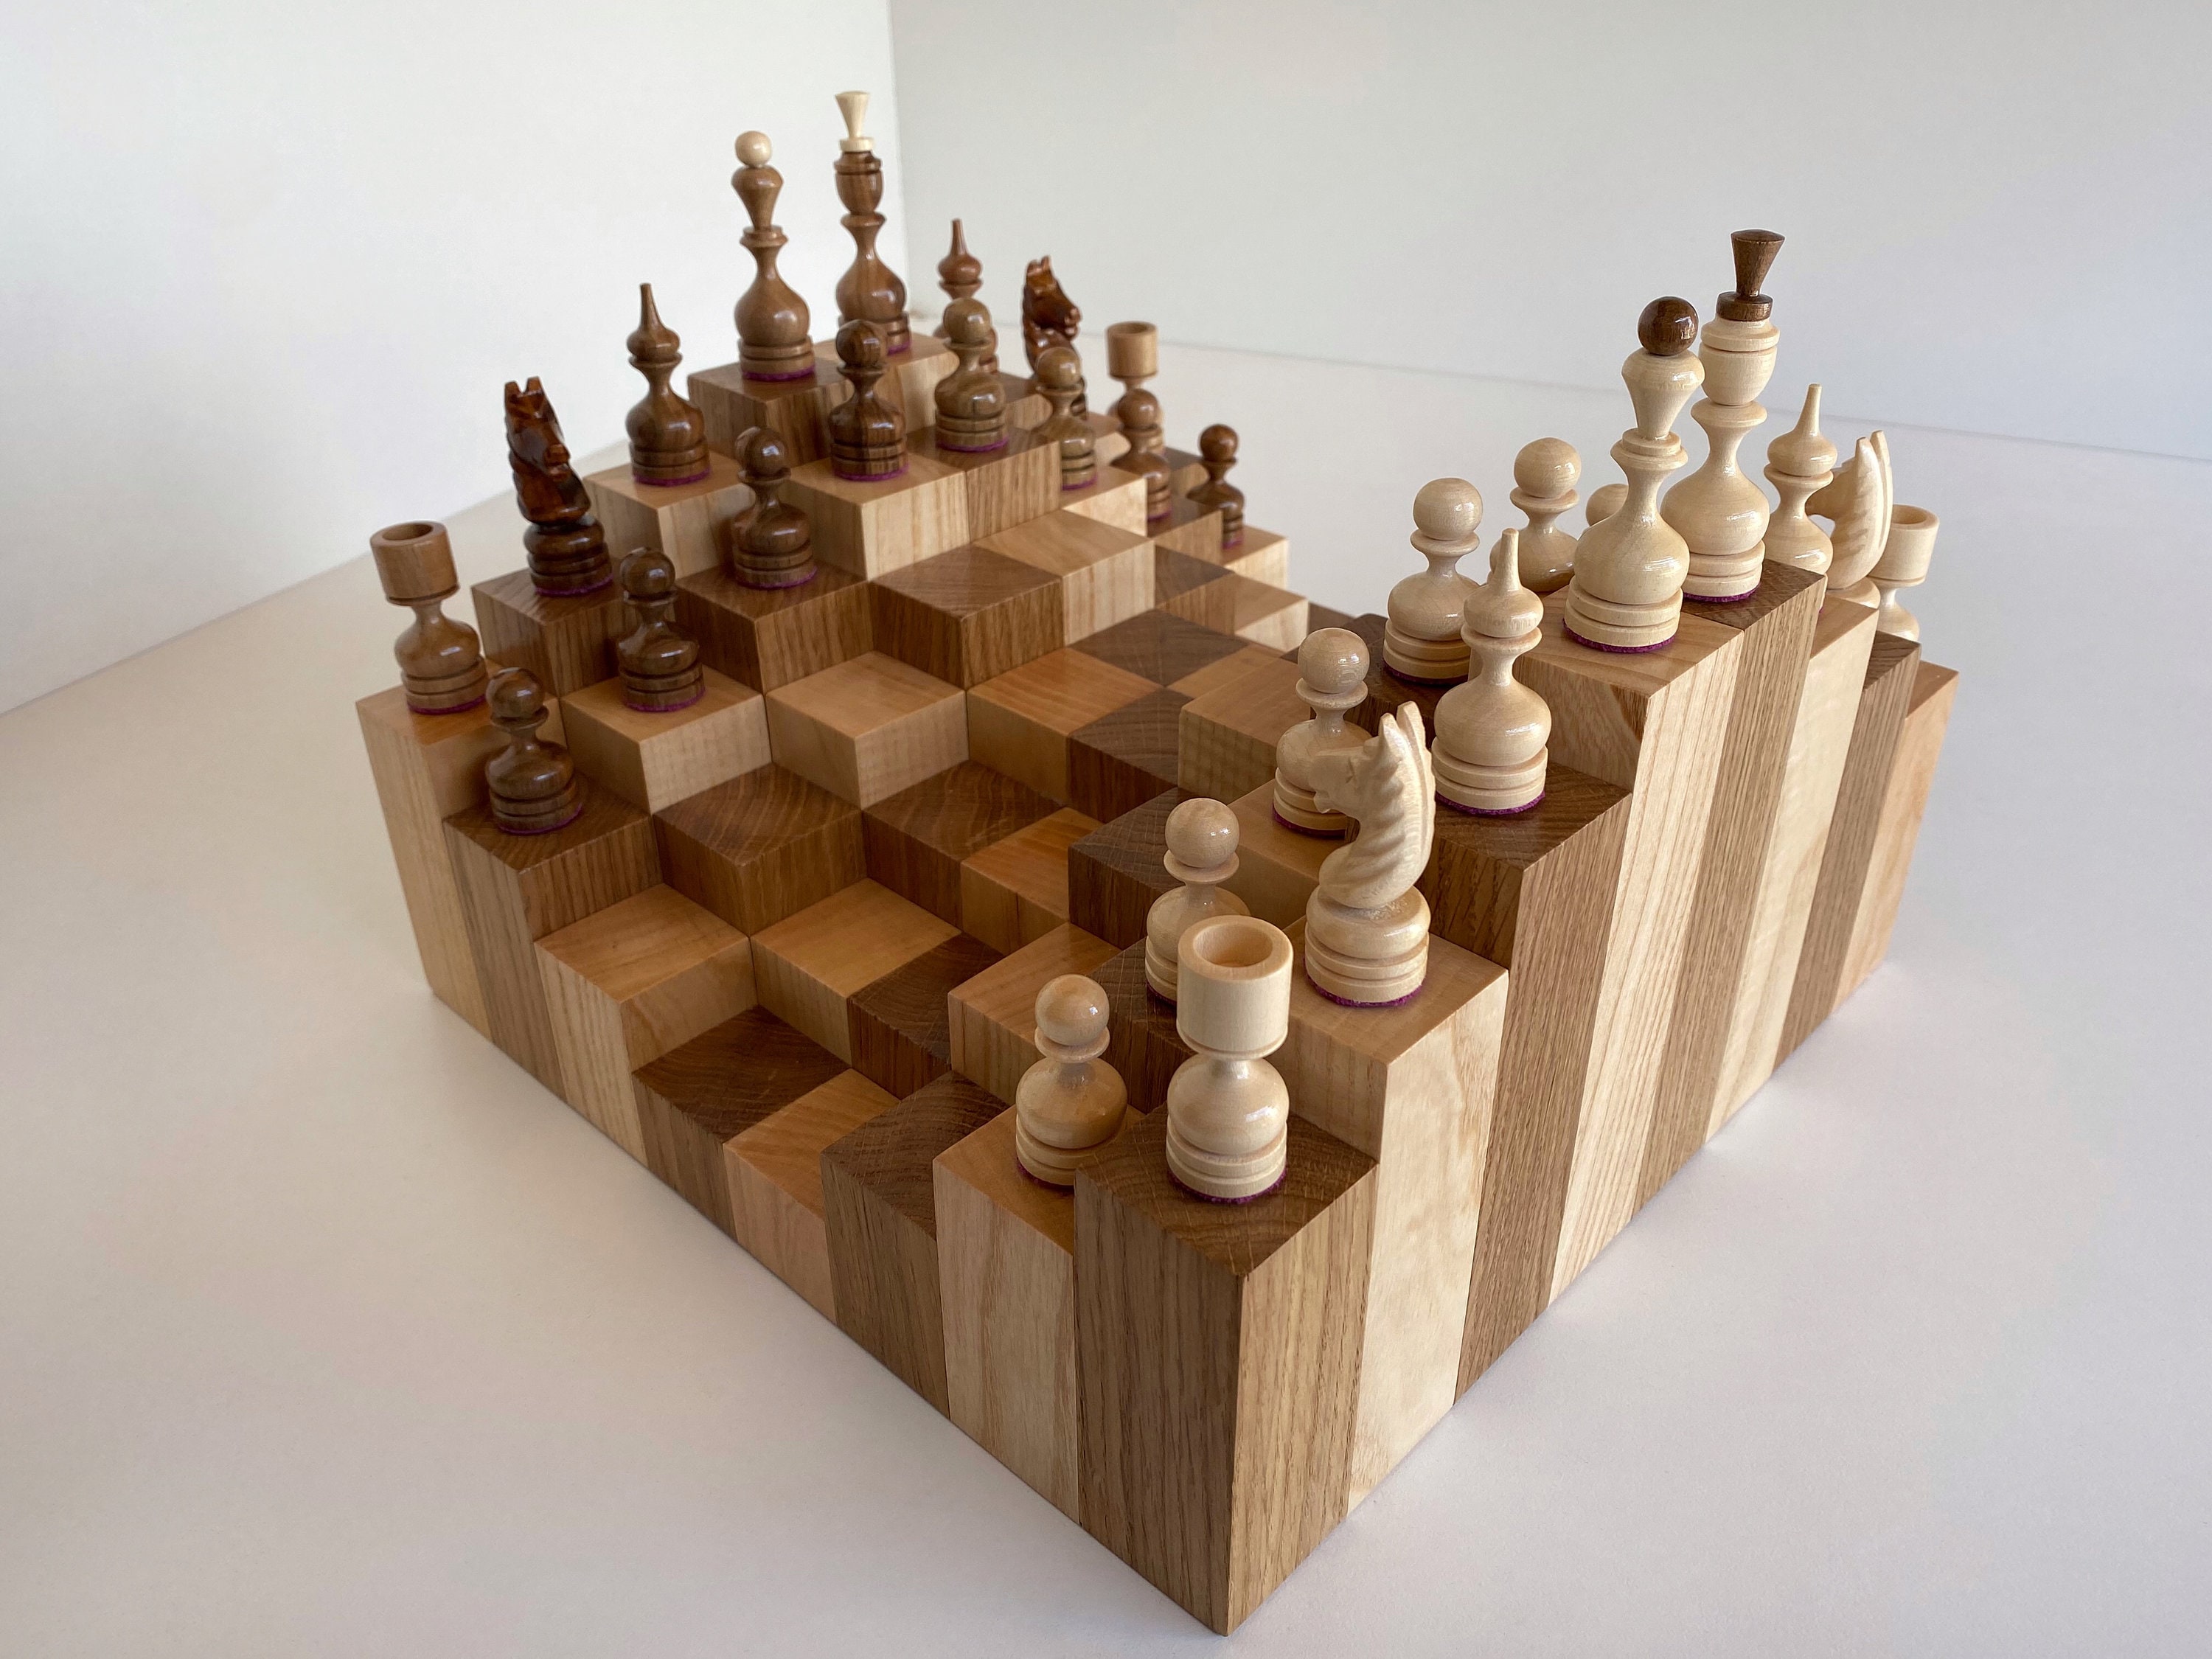 I made a 3D Chess board integrated with Lichess using Svelte